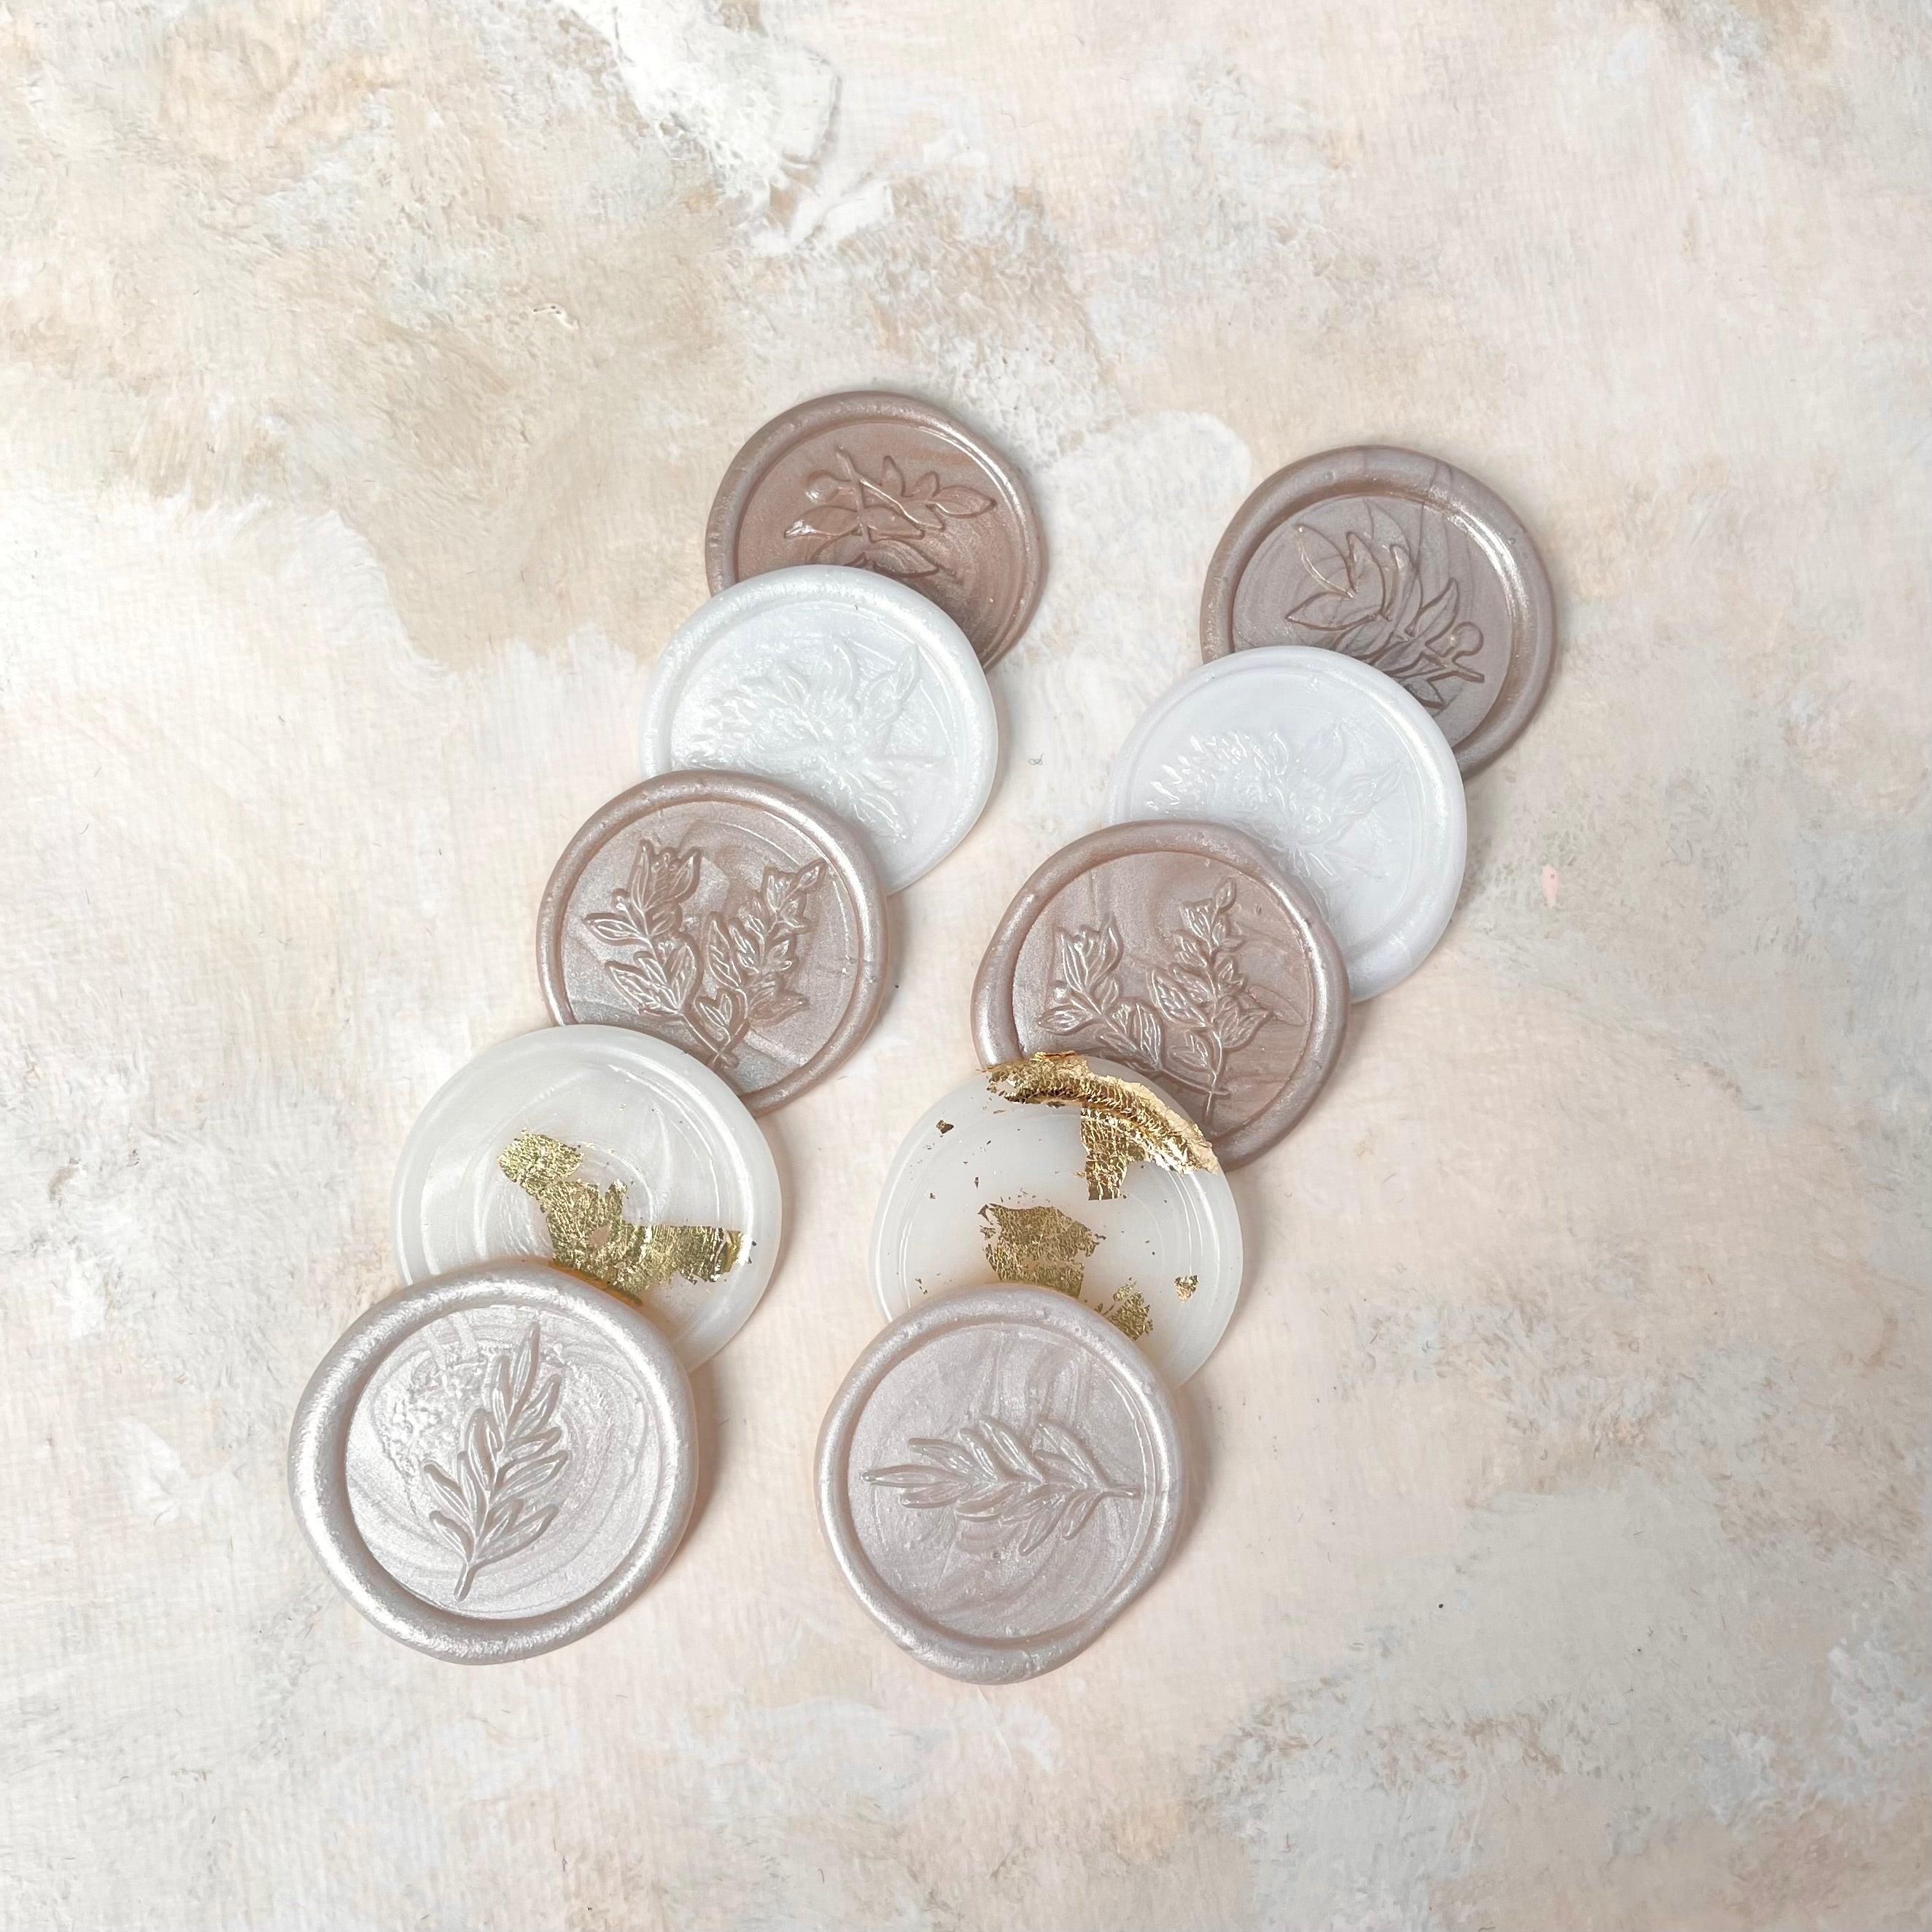 10 wax seals with leaf & floral design  - Wedding Flat lay props from Champagne & GRIT